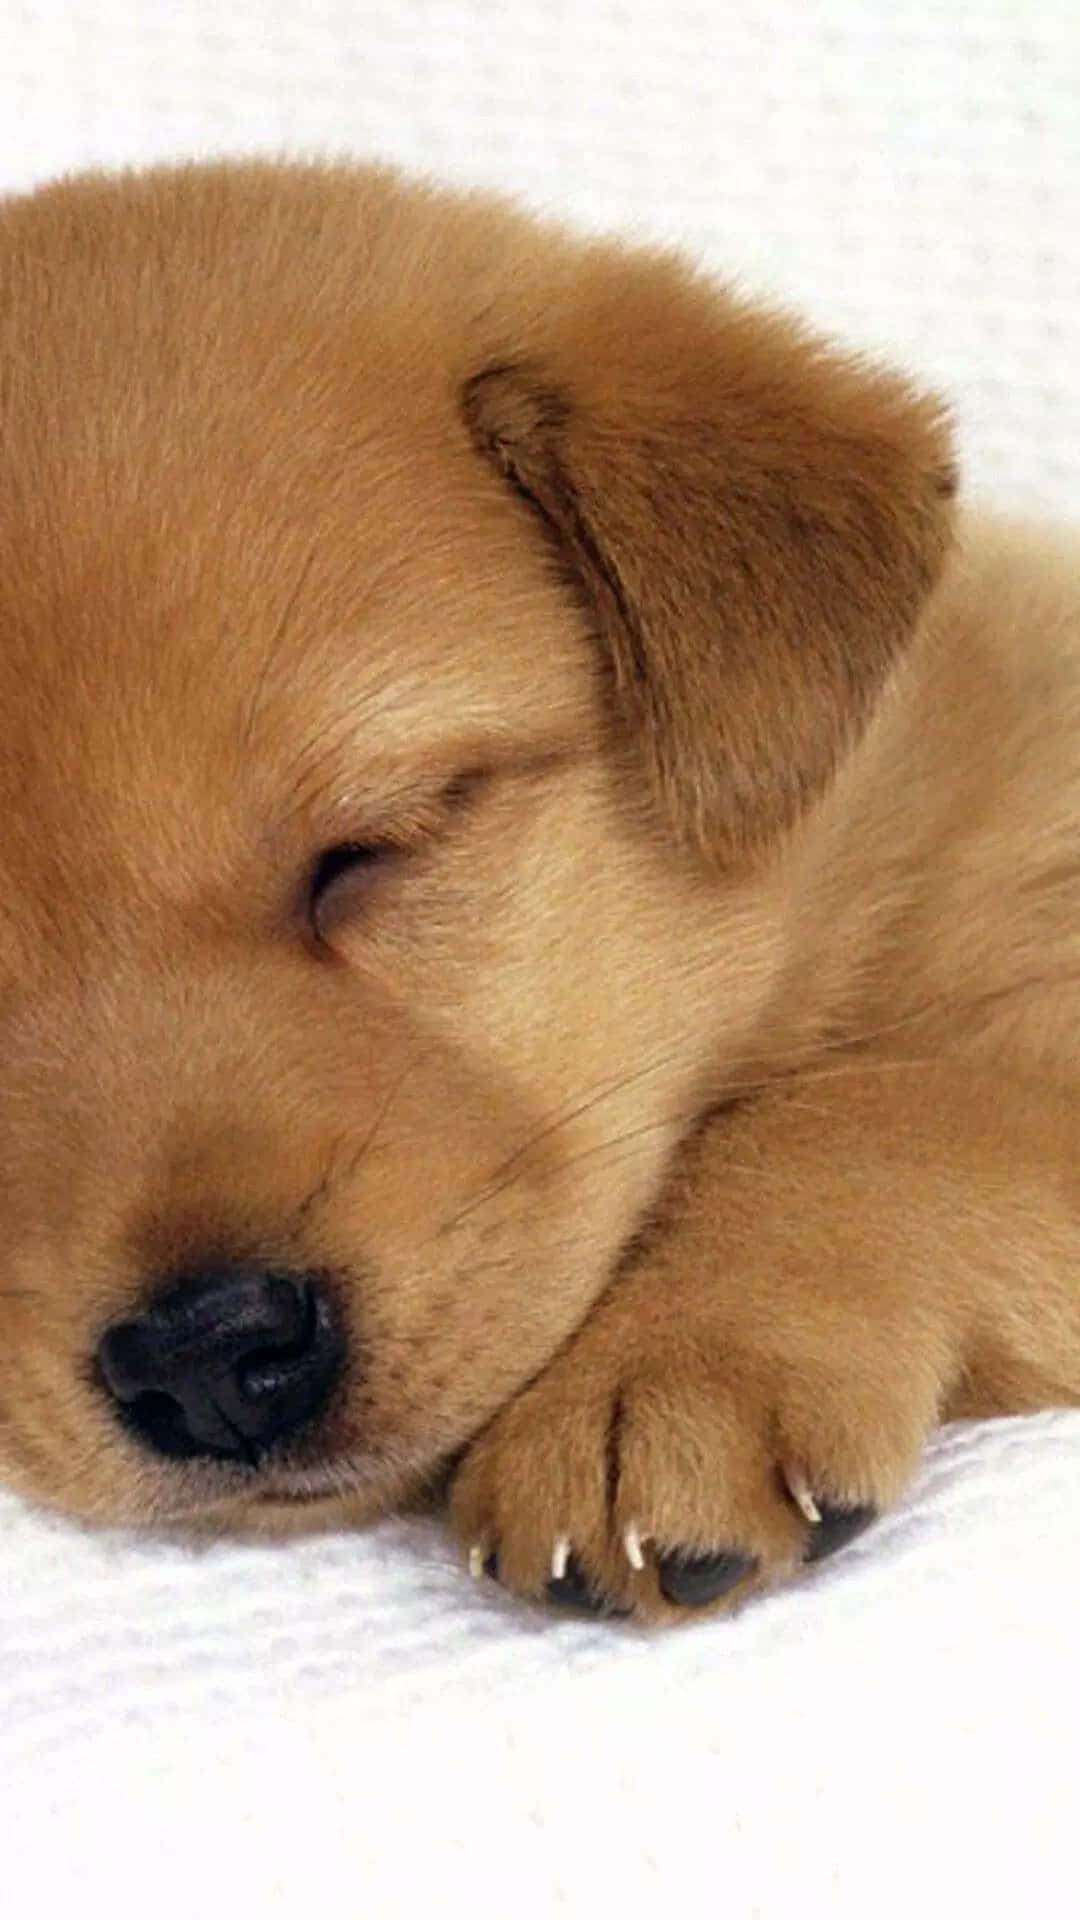 Look at this fluffy puppy, aren't they adorable? Wallpaper